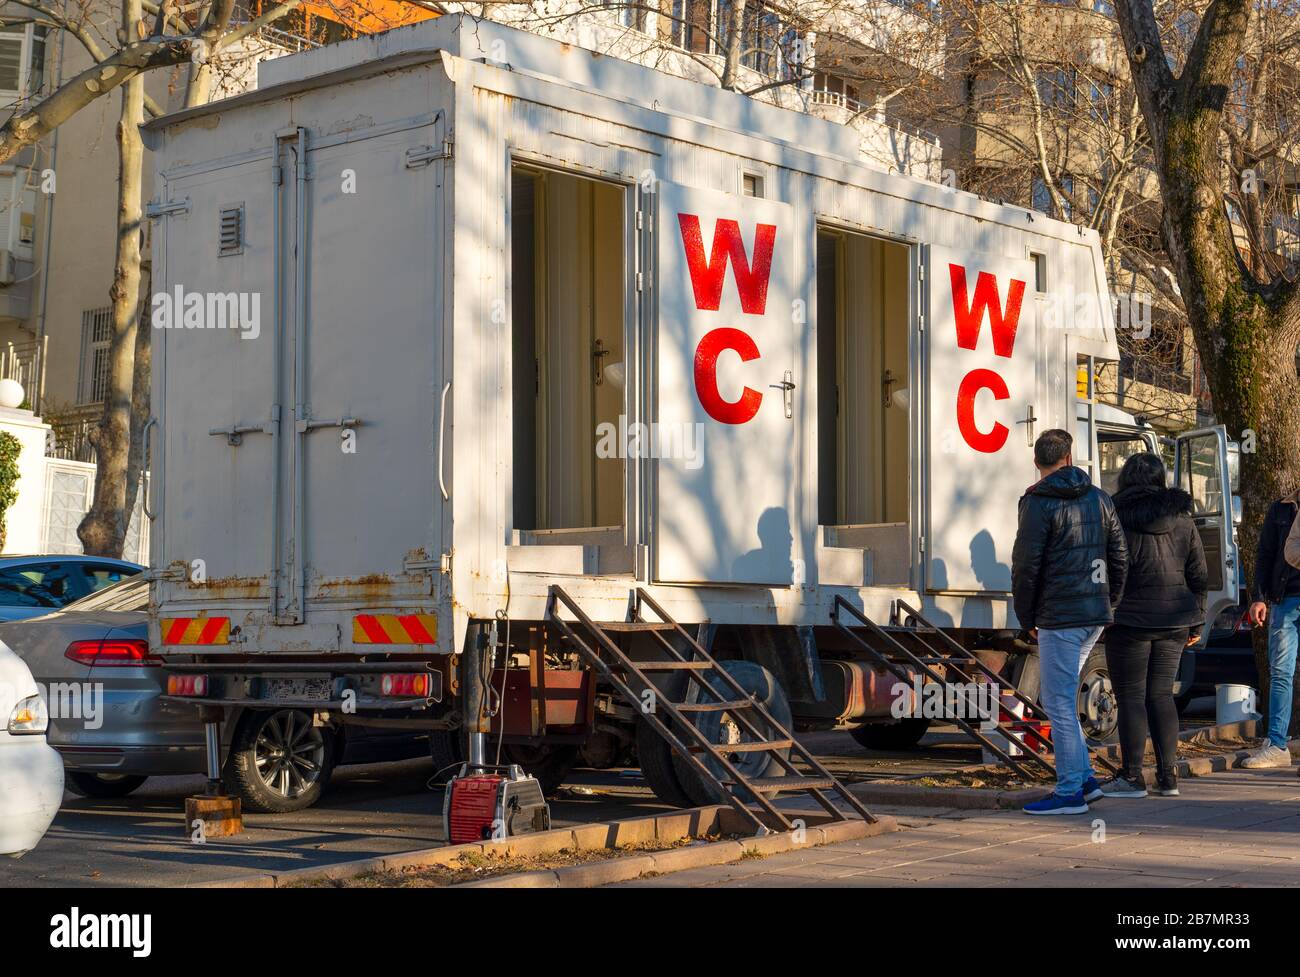 Mobile toilets truck parked in a busy street for an event in the city Stock Photo